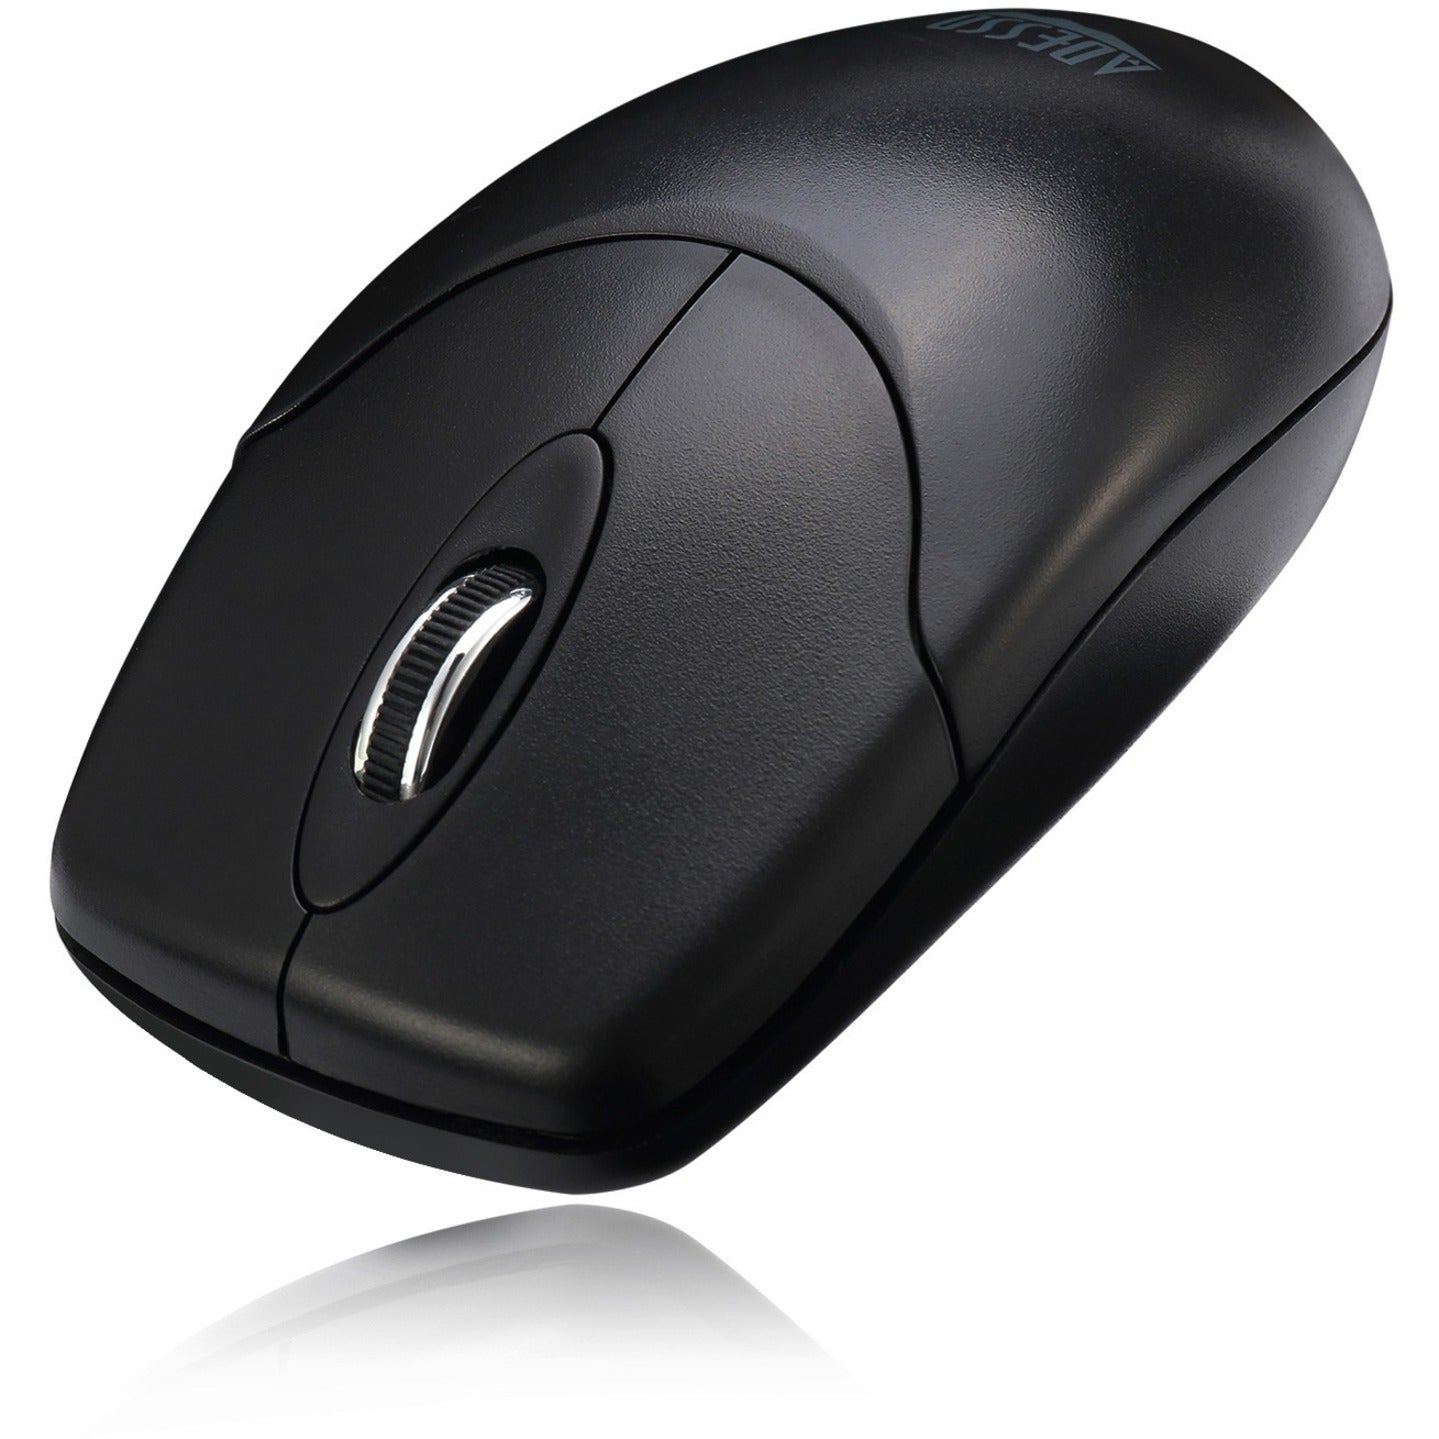 Adesso IMOUSE M60 Antimicrobial Wireless Desktop Mouse, 2.4 GHz Radio Frequency, 1200 dpi Optical, USB